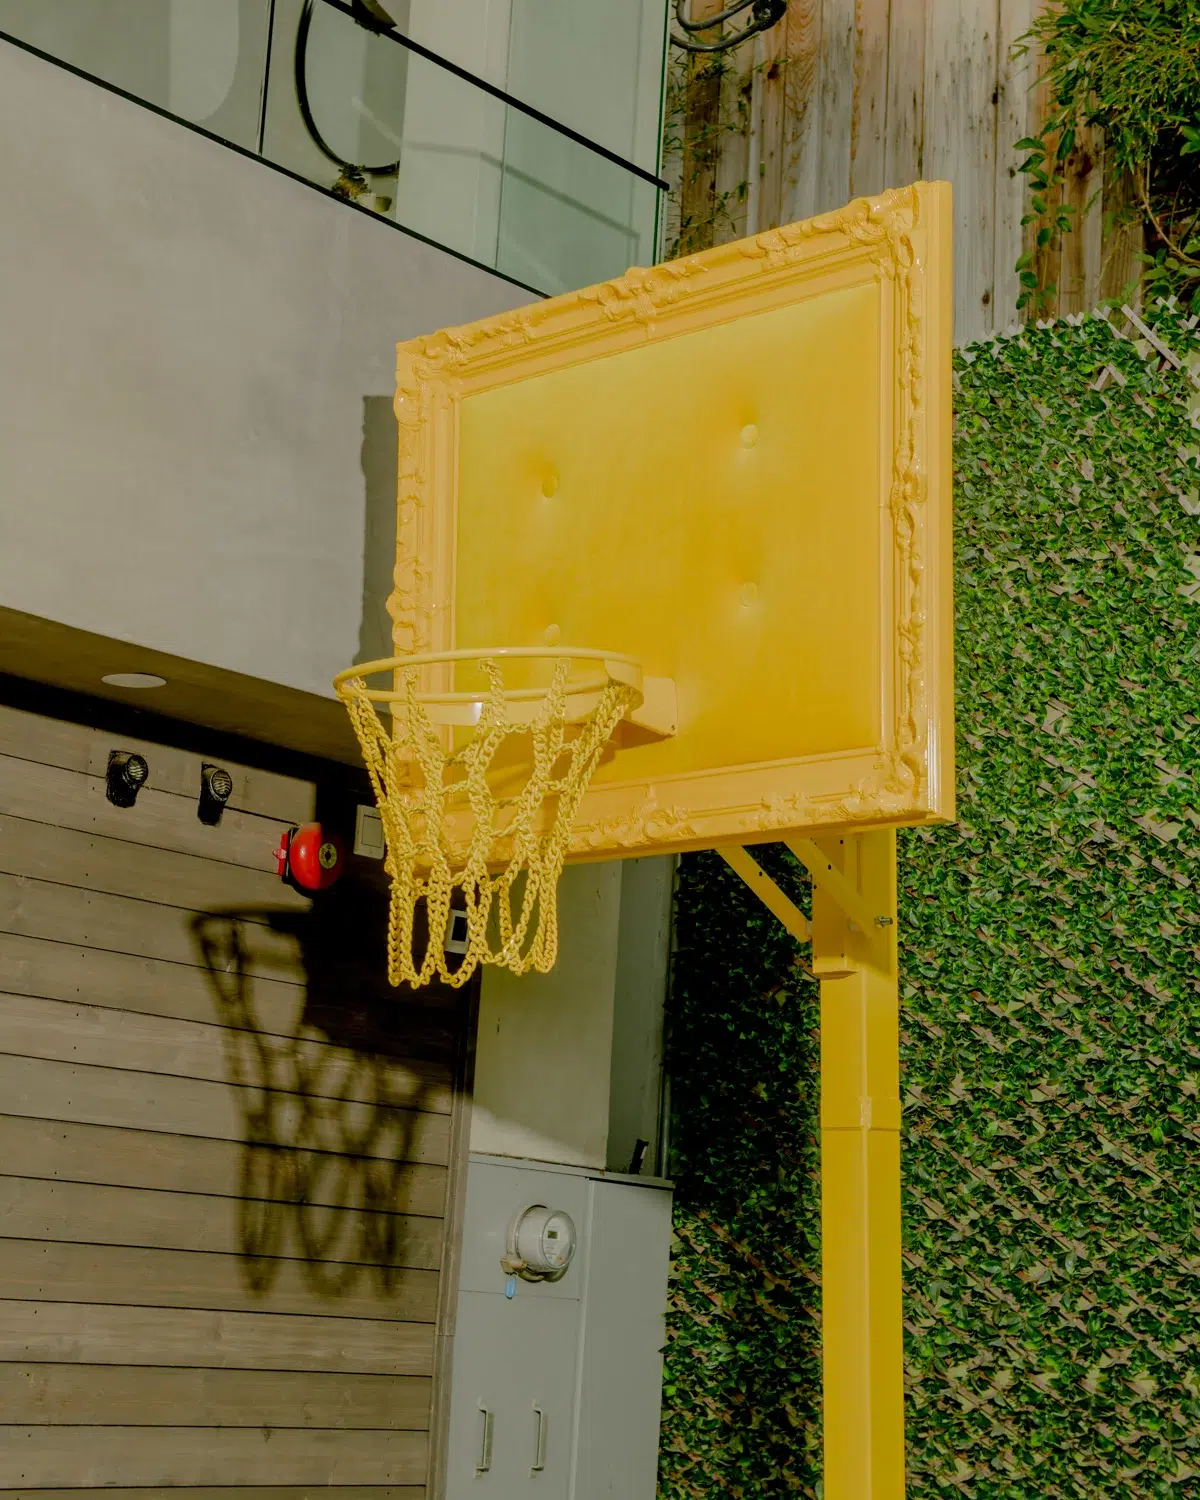 A vibrant yellow velvet hoop adorns the exterior of this house.